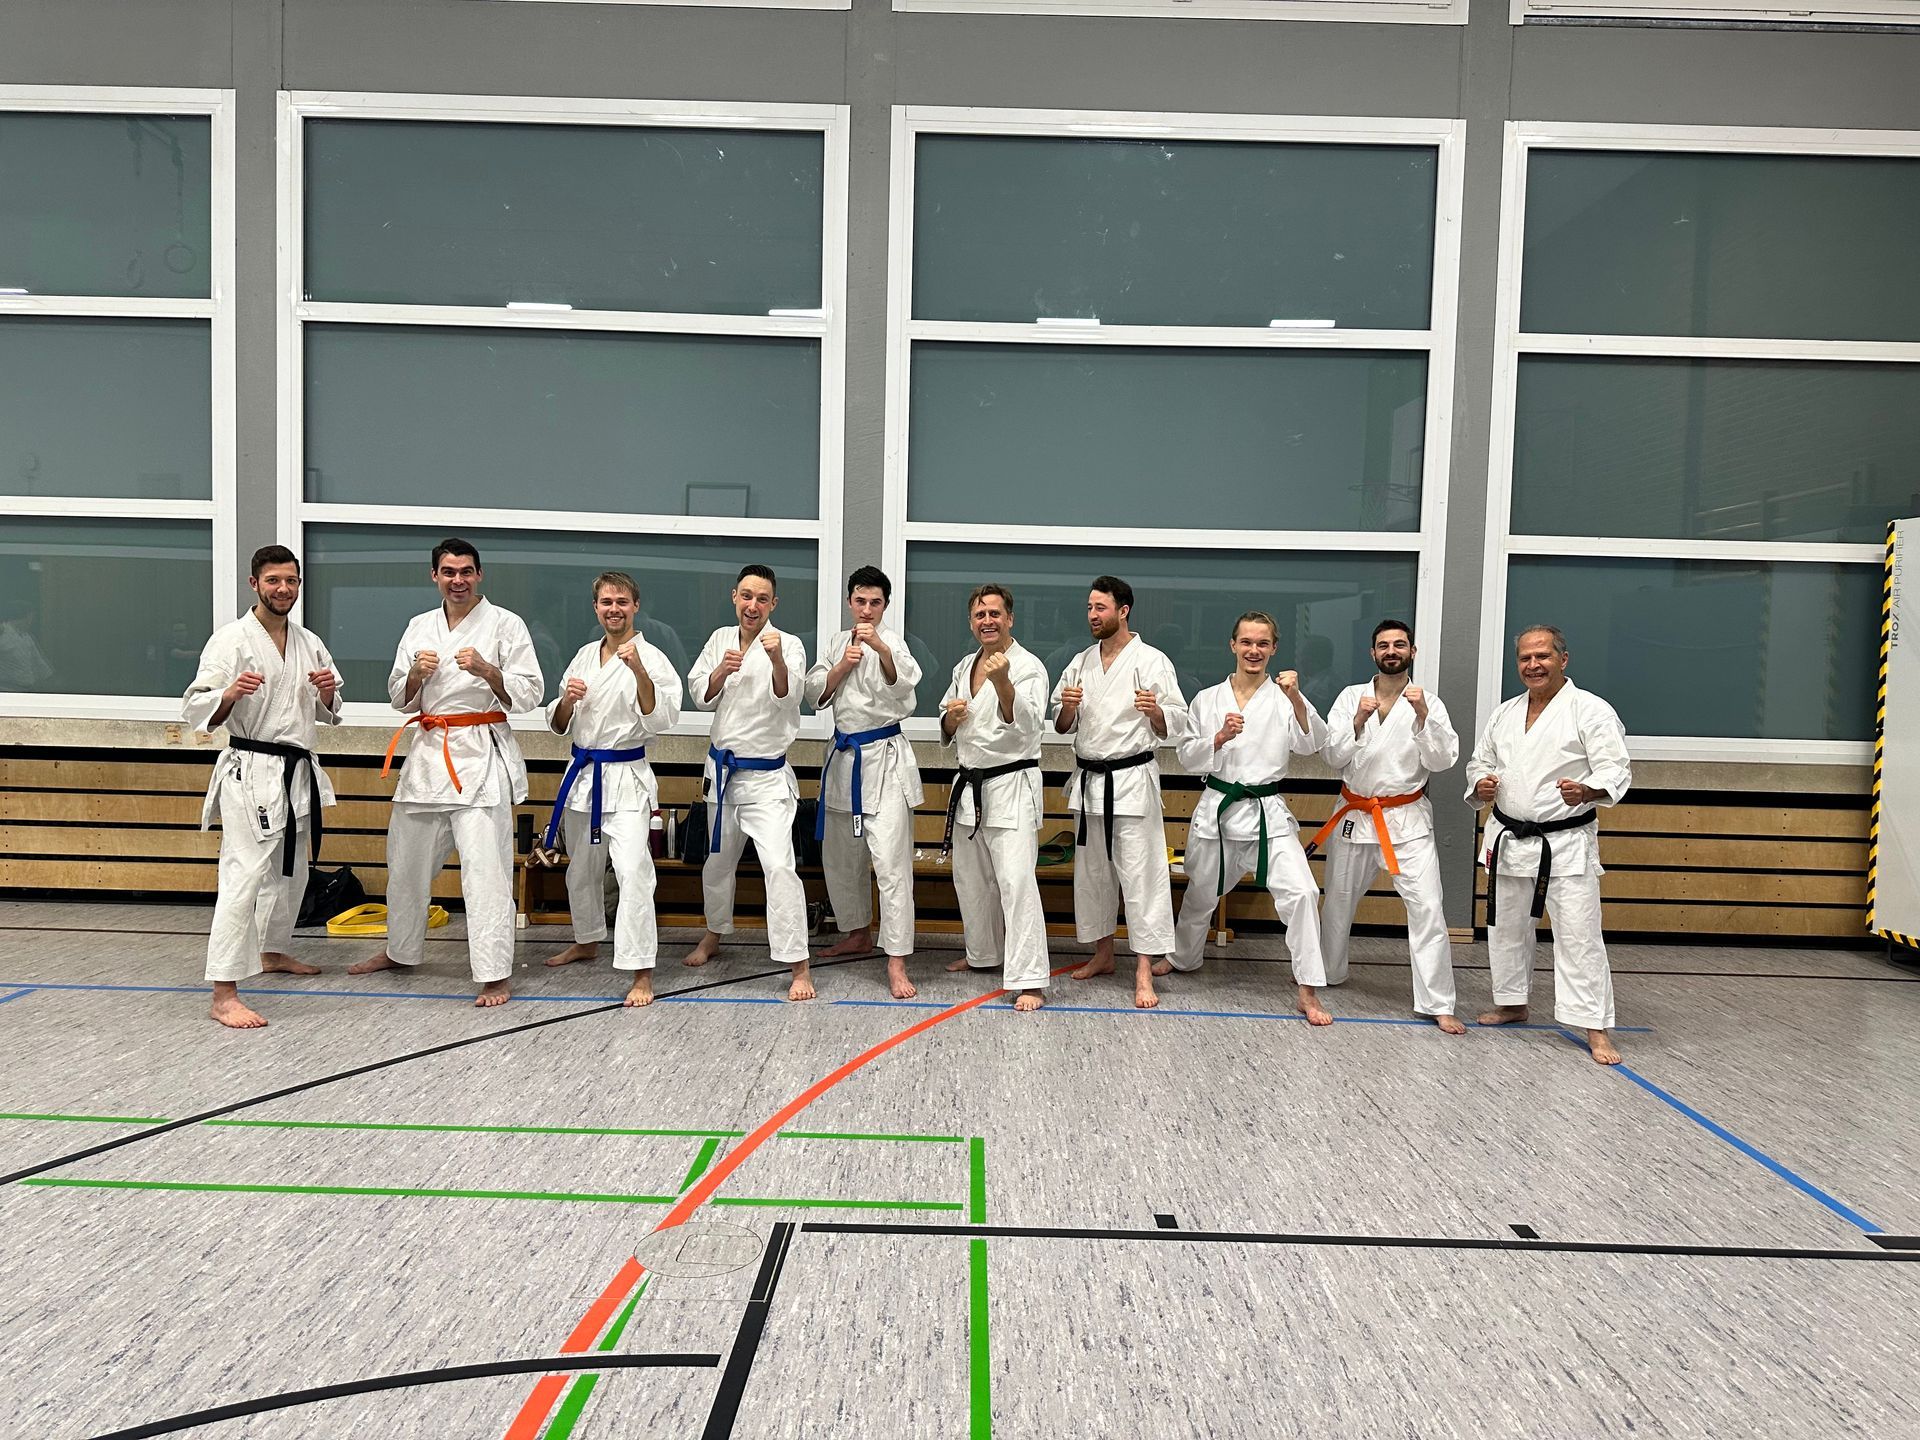 a group of men in karate uniforms are posing for a picture